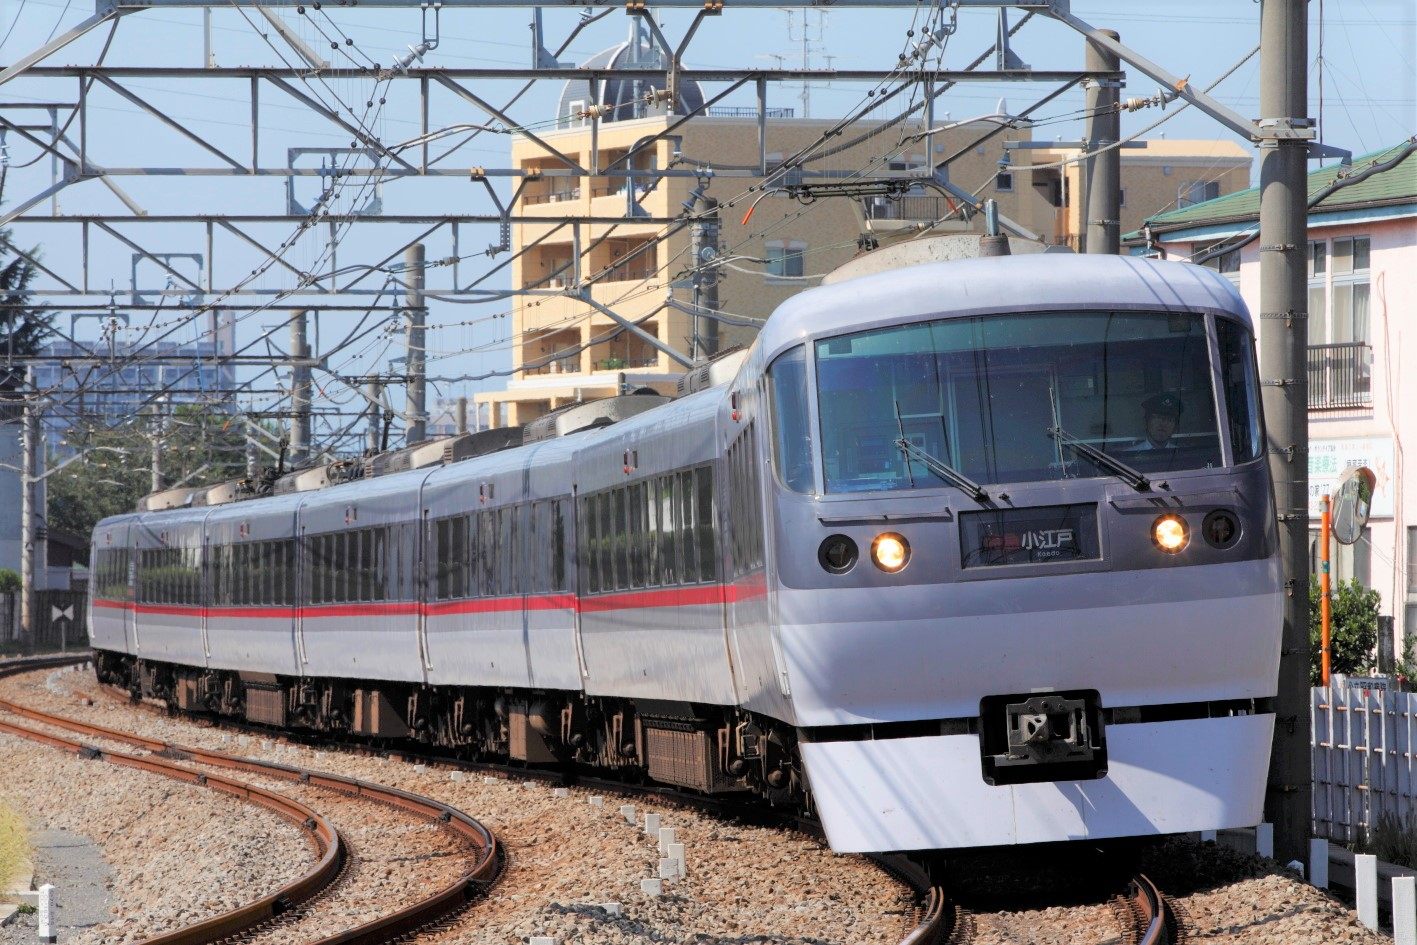 Travel from Seibu Shinjuku Station to Honkawagoe Station in just 44 minutes on the Limited Express Red Arrow! Separate limited express ticket is required.